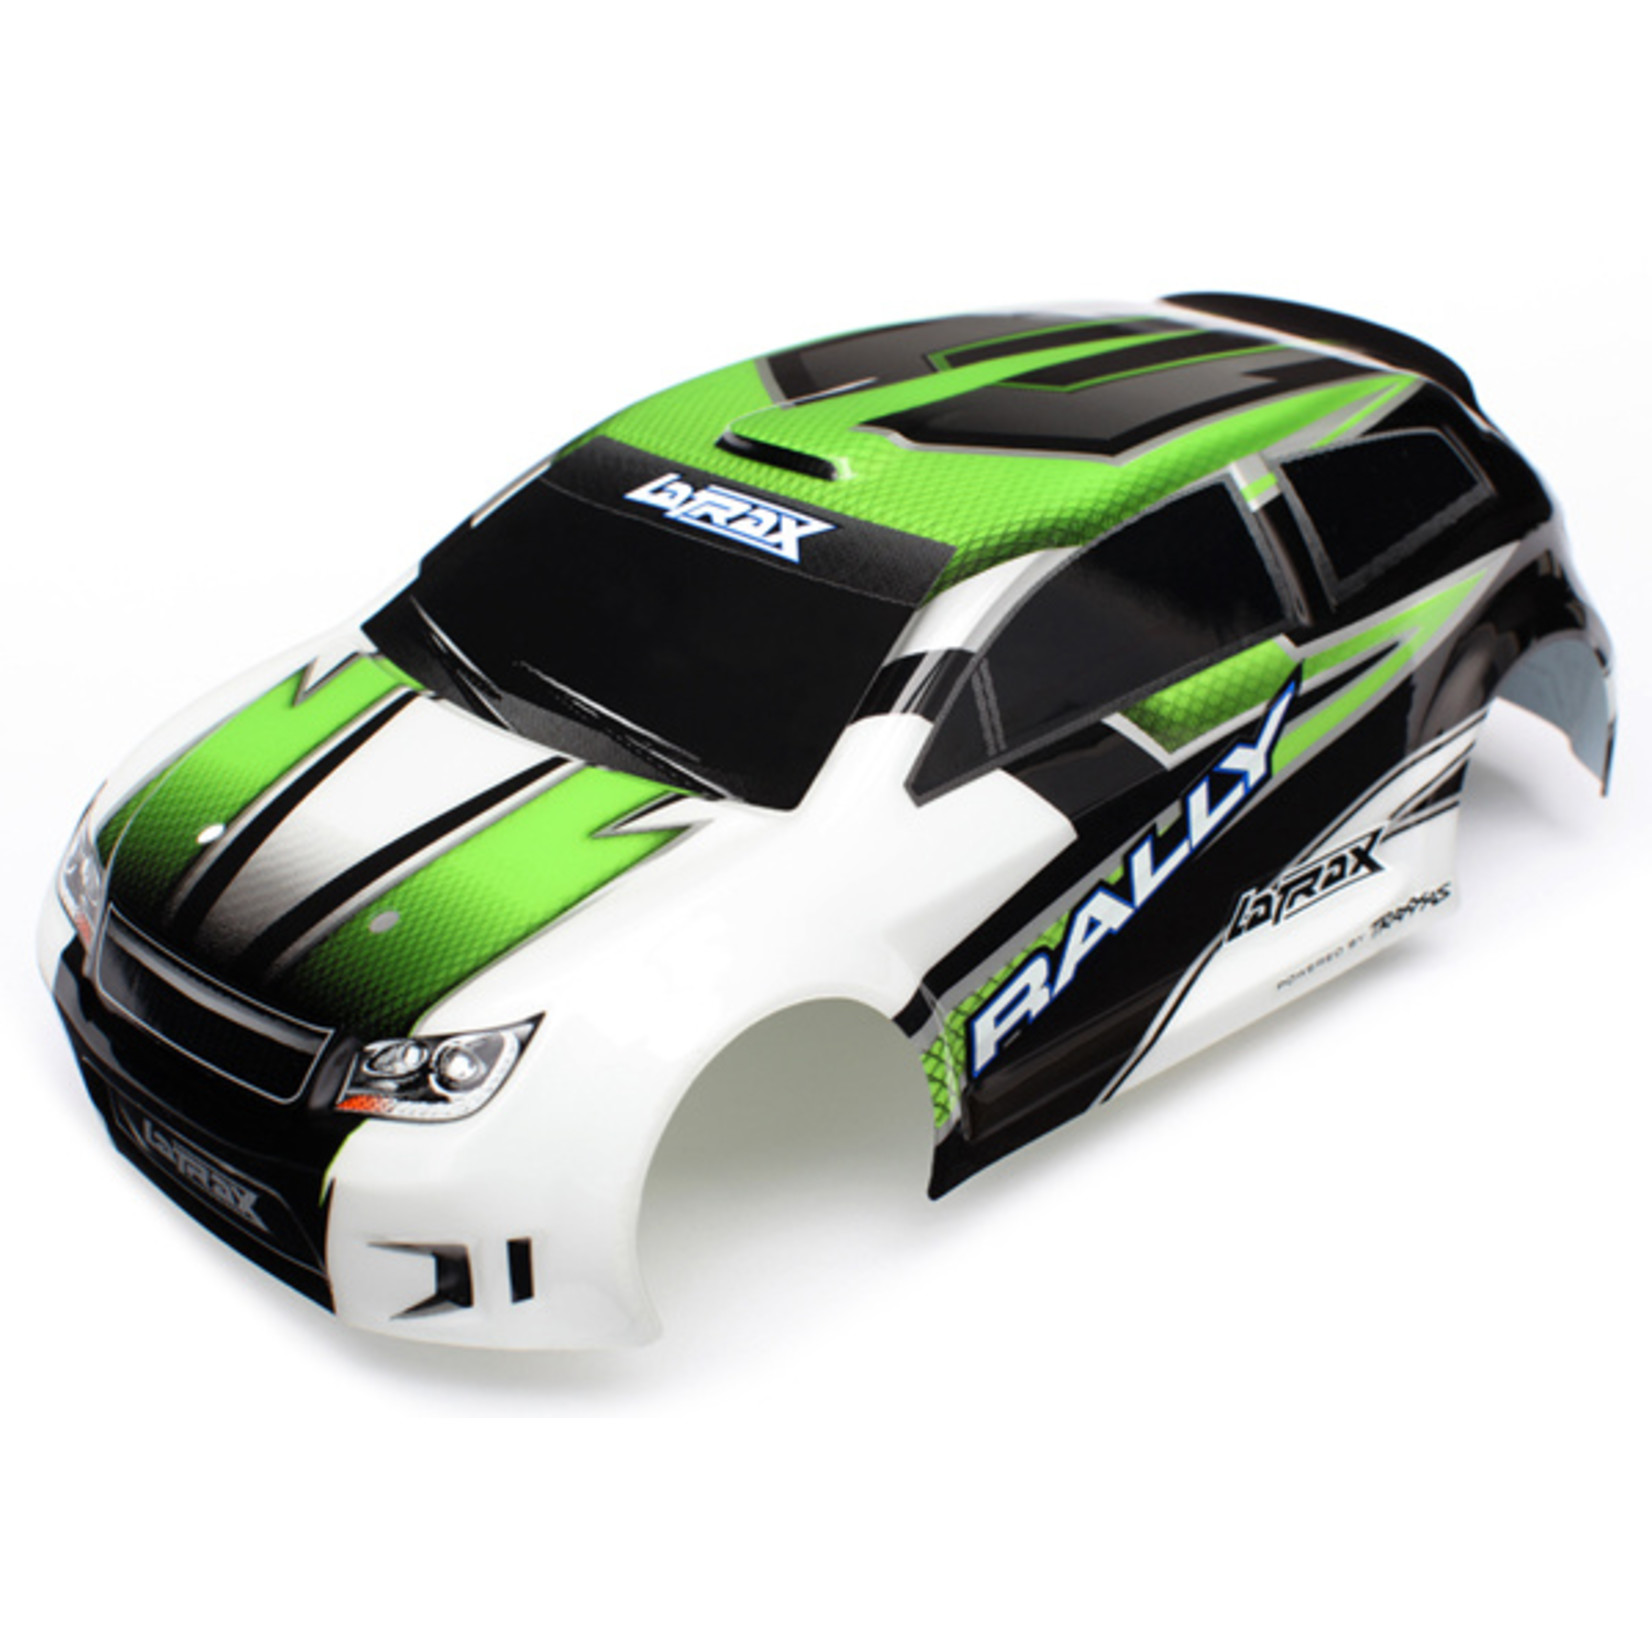 Traxxas 7513 - Body, LaTrax Rally, green (painted)/ decals